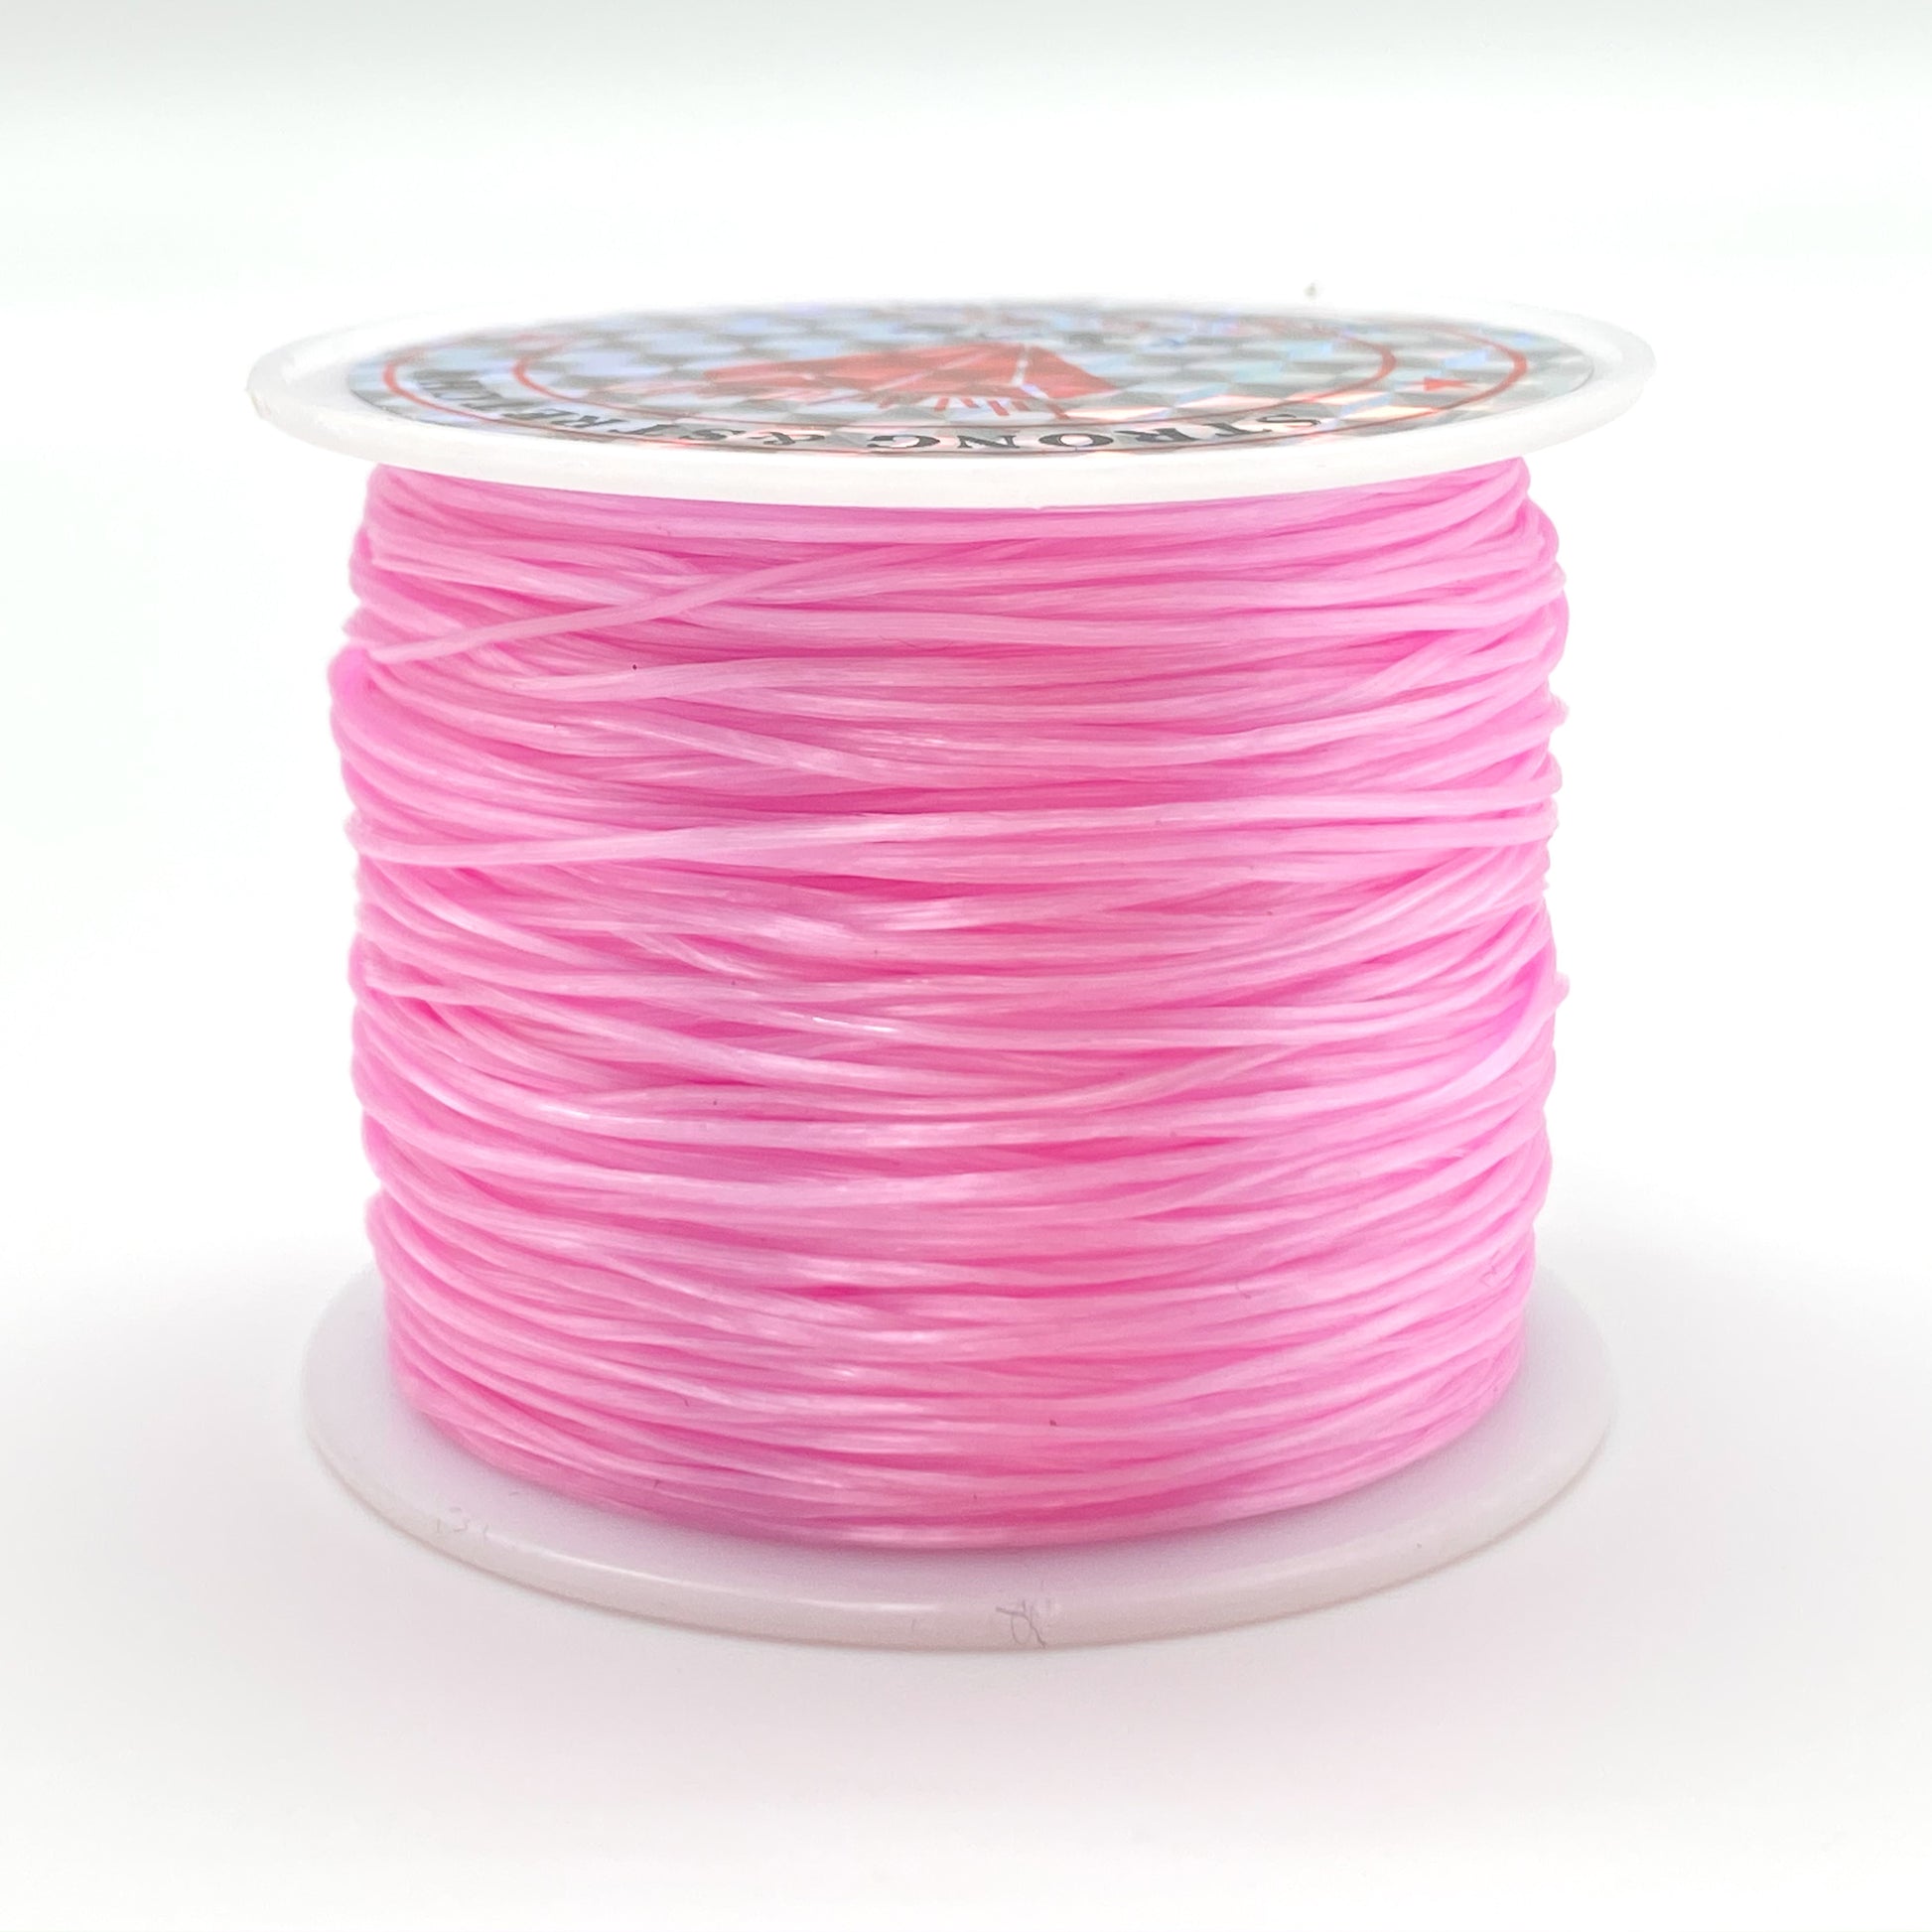 Stretchy Cord Spool - A BESTSELLER